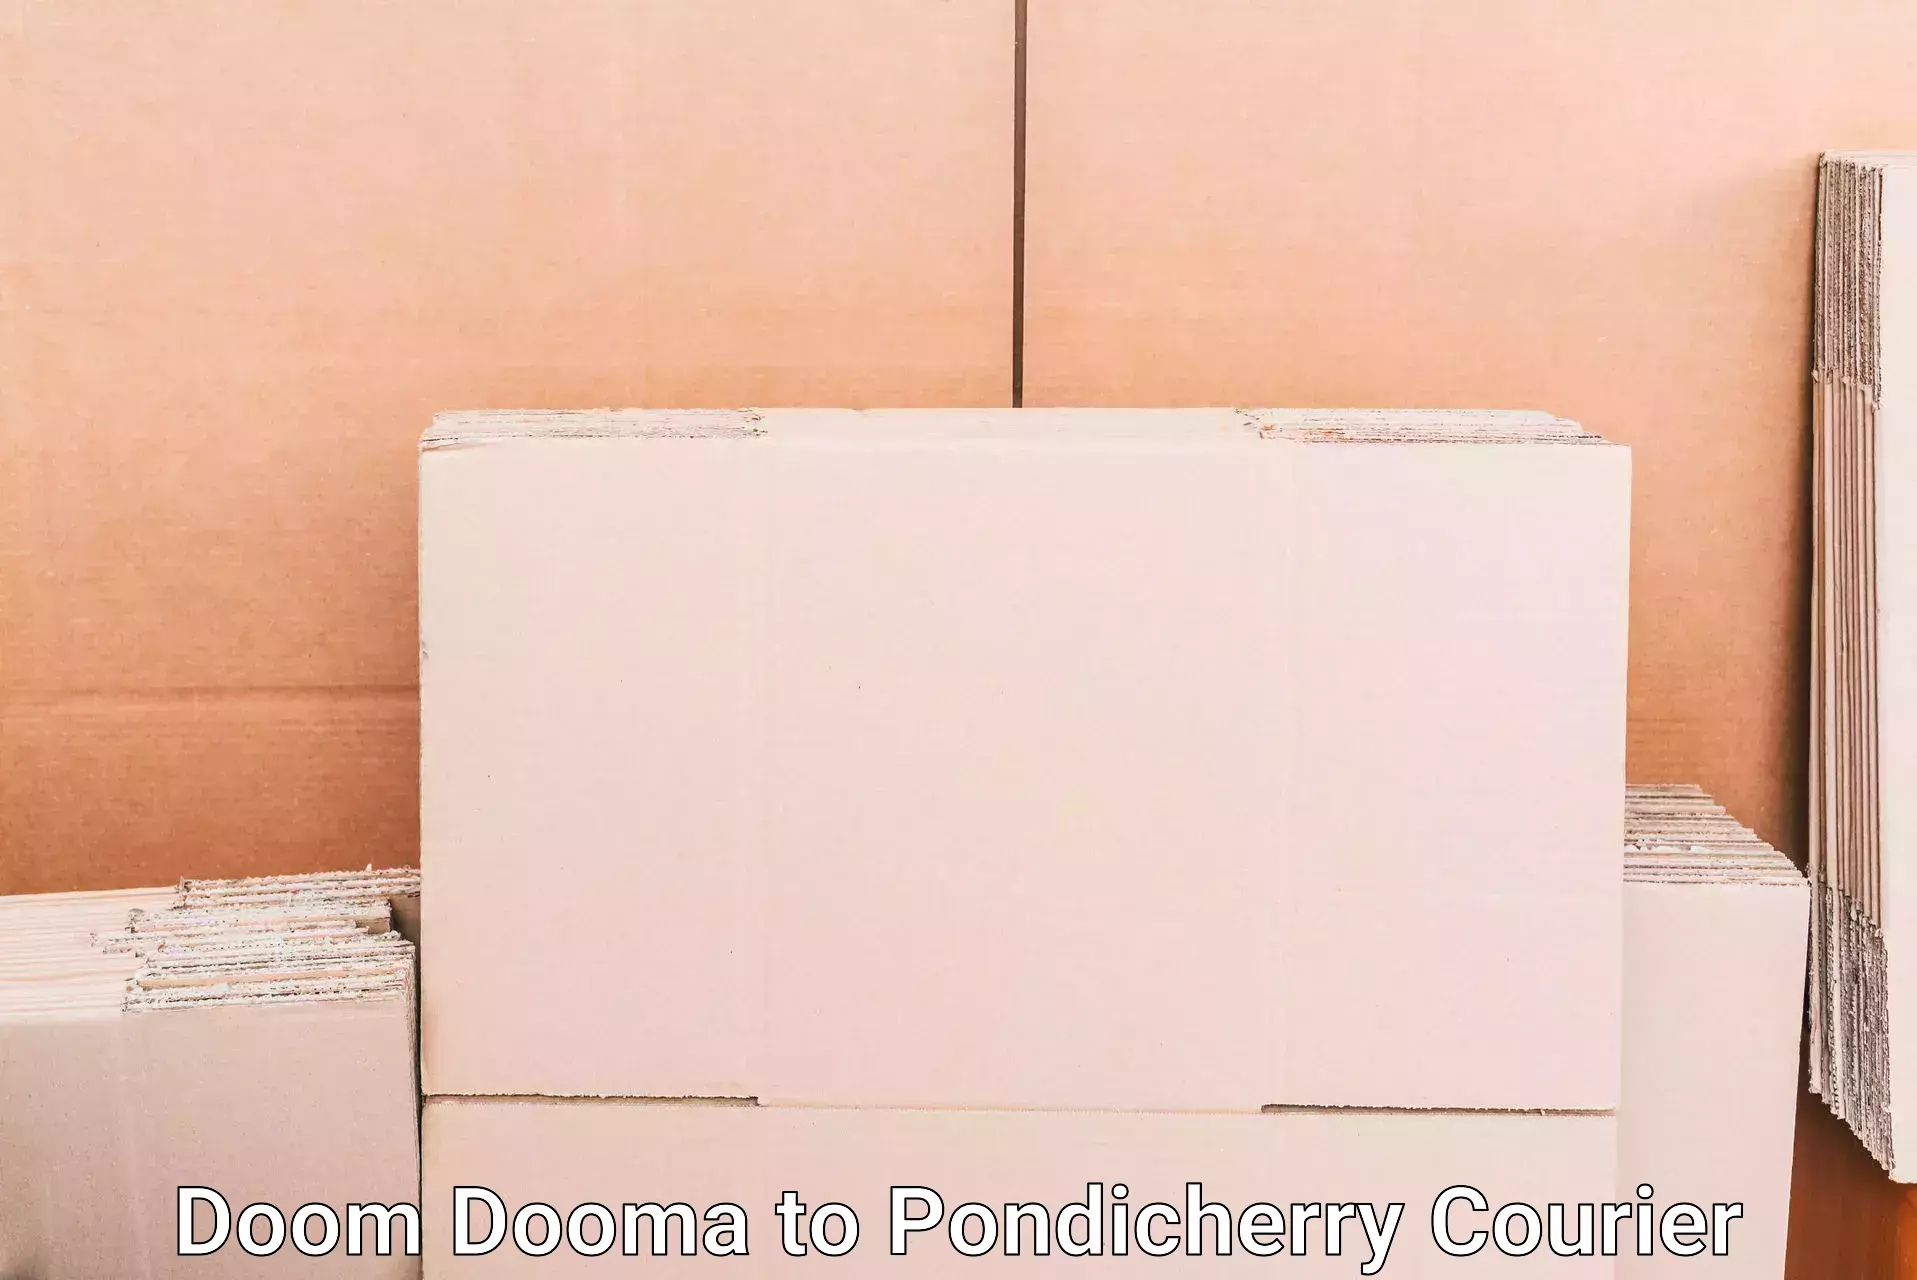 Online luggage shipping booking Doom Dooma to Pondicherry